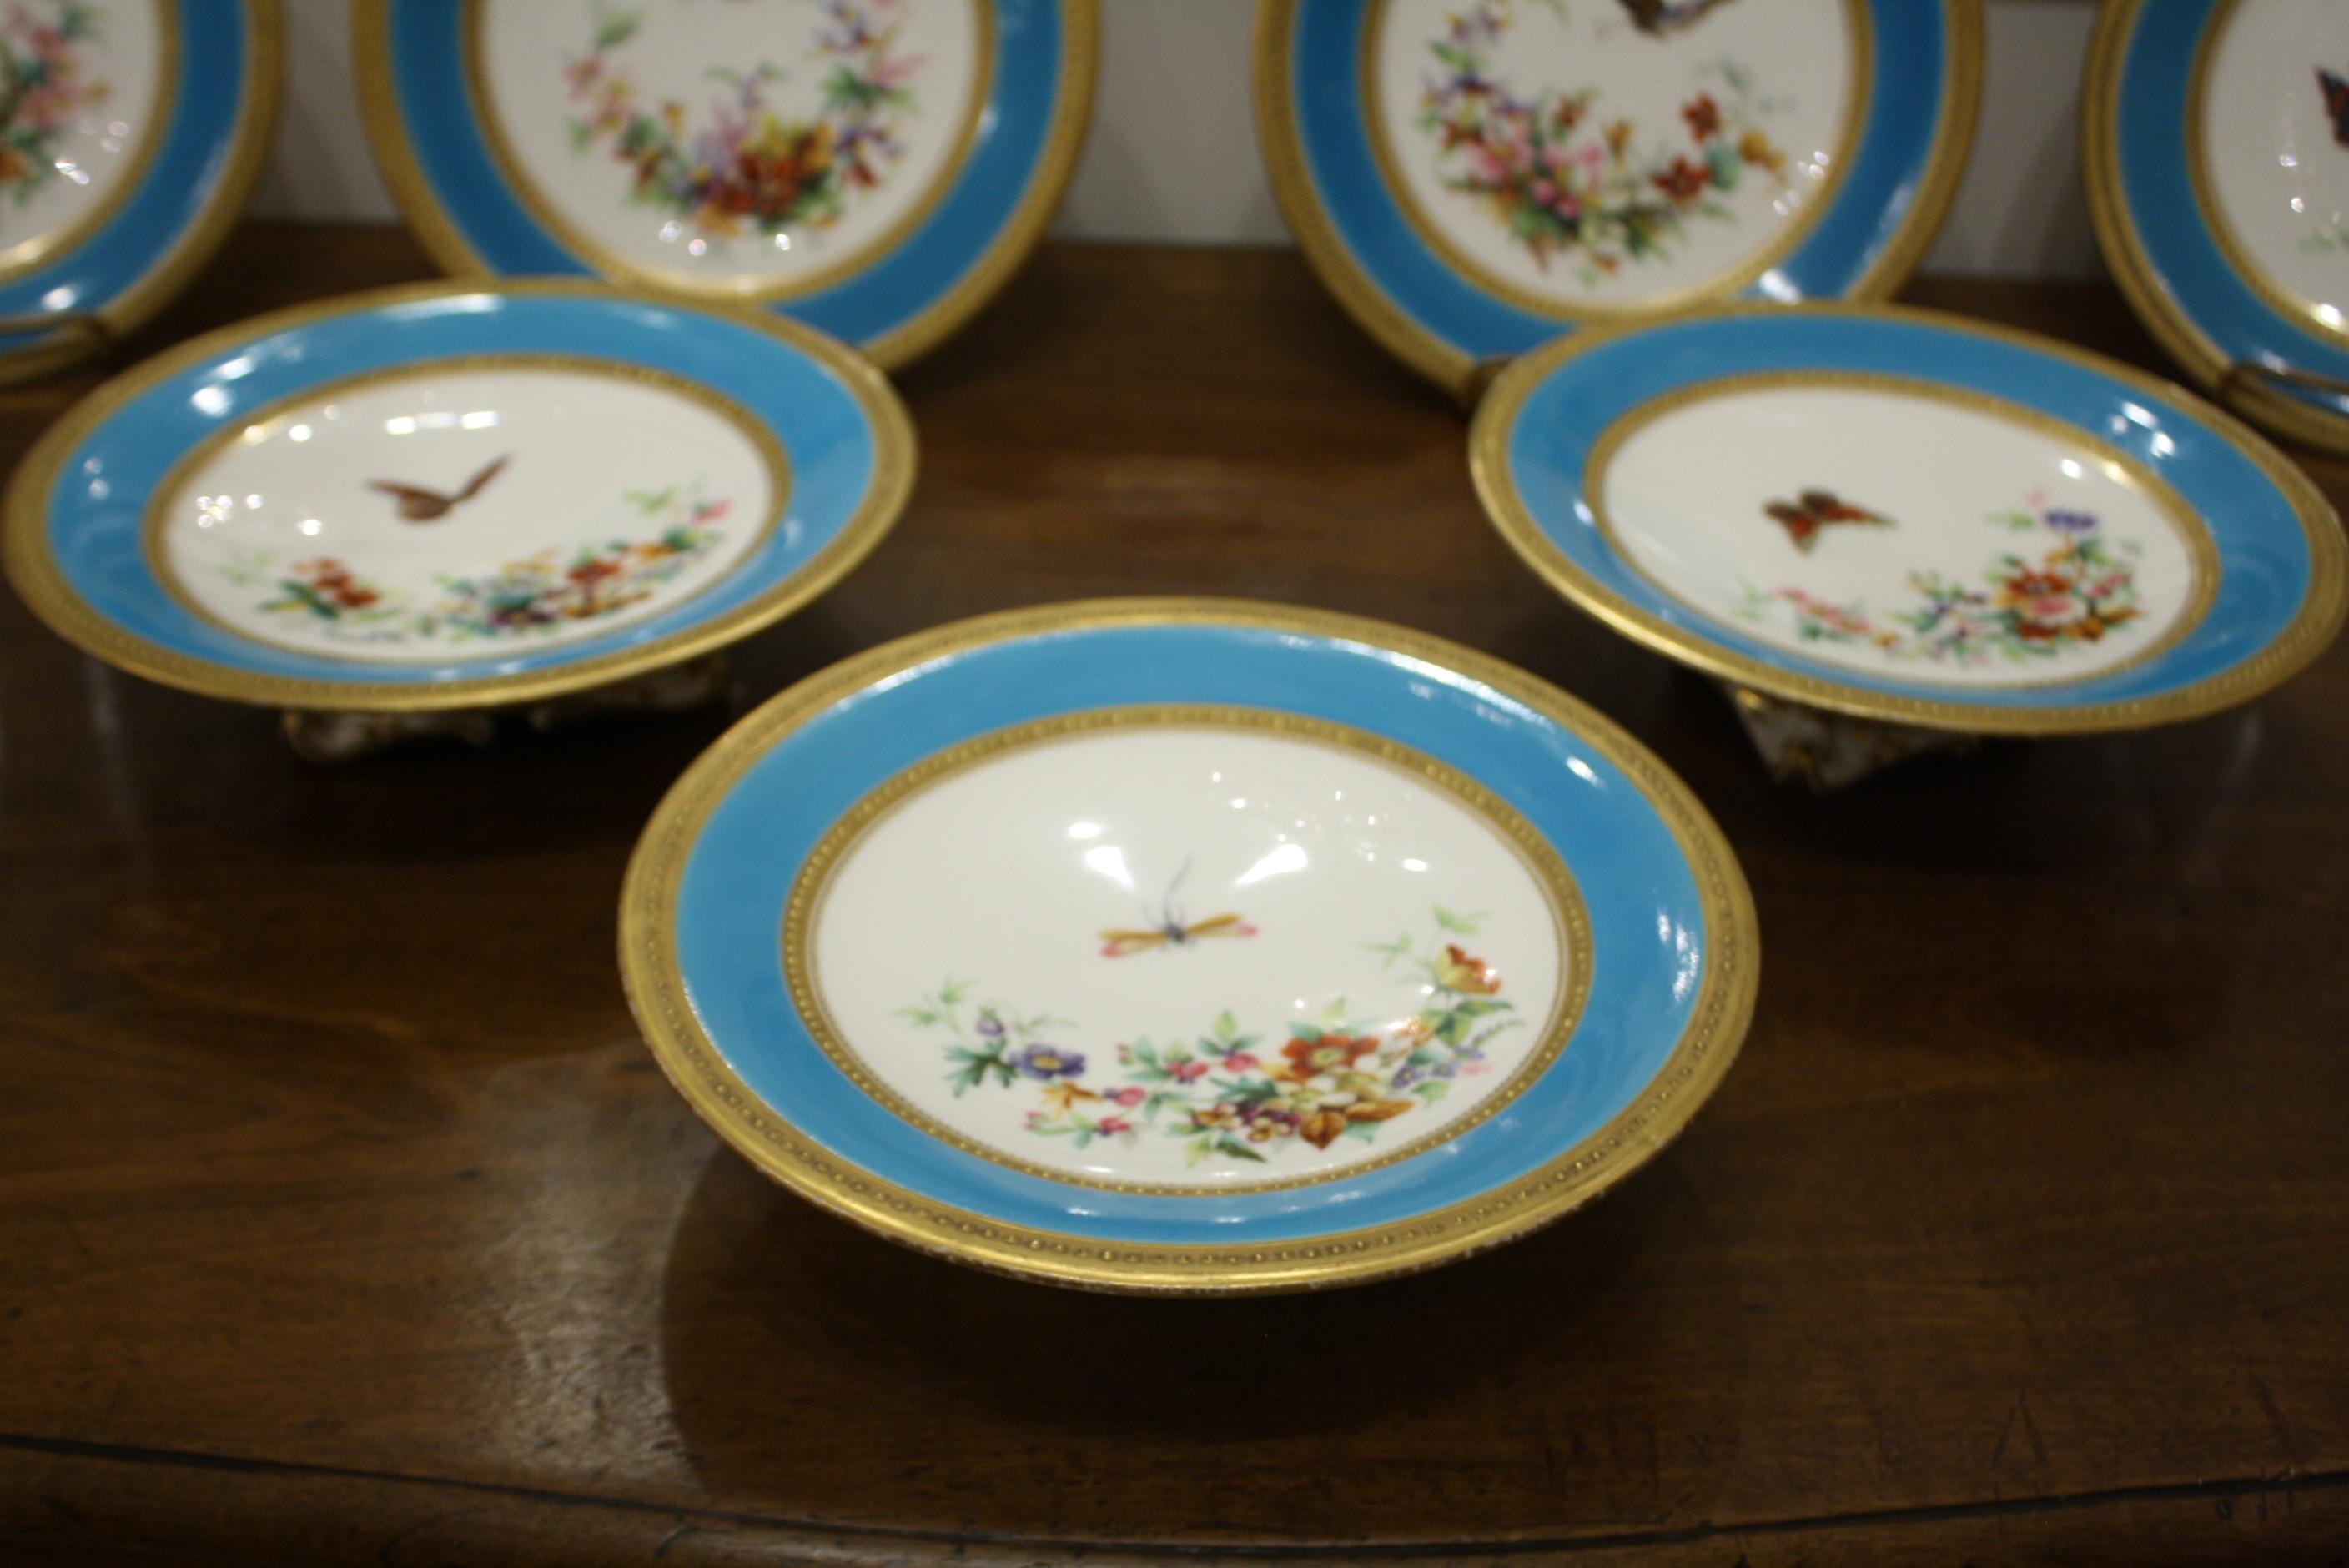 Minton Dessert Service with Butterflies and Flowers and Gold Rims In Good Condition For Sale In Pembroke, MA